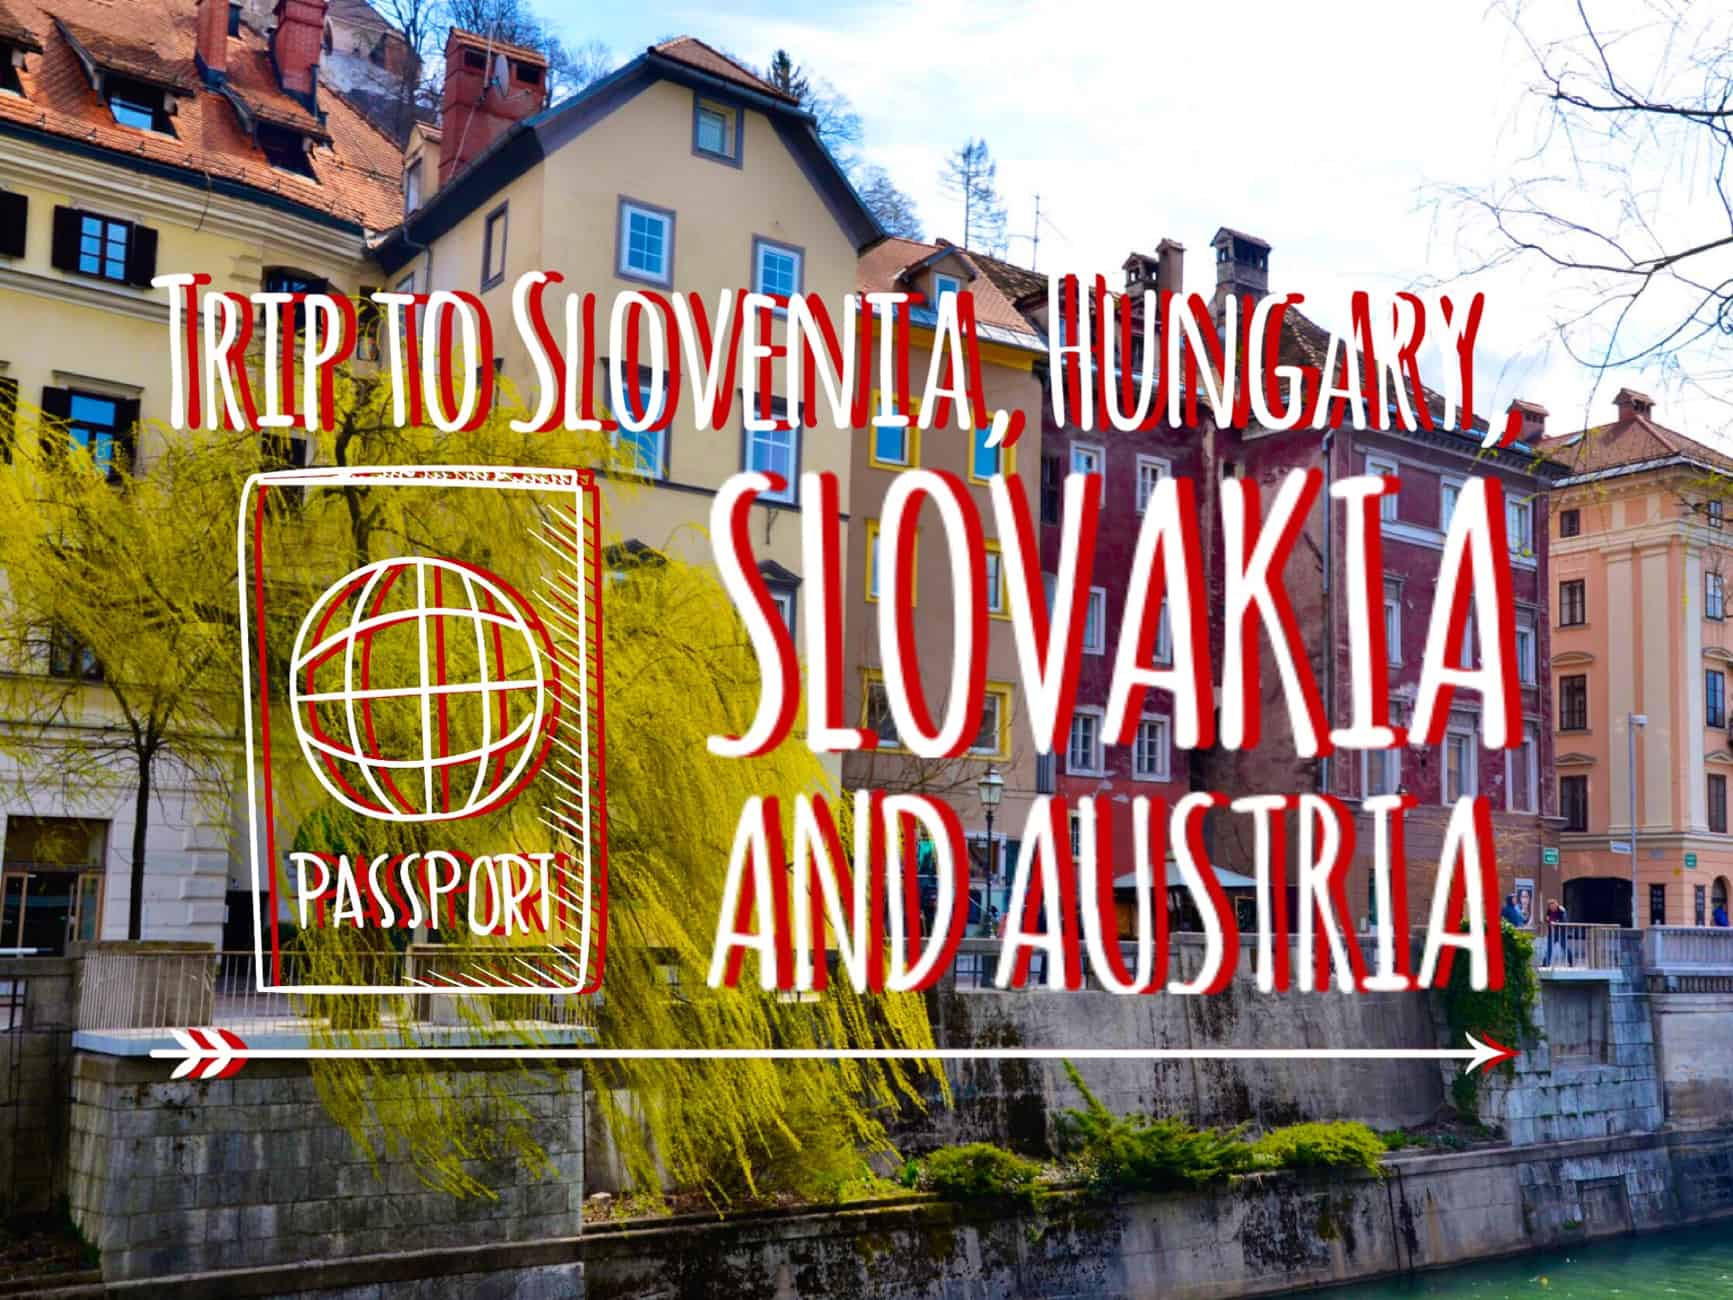 Central Europe: Slovenia, Hungary, Slovakia and Austria in one trip